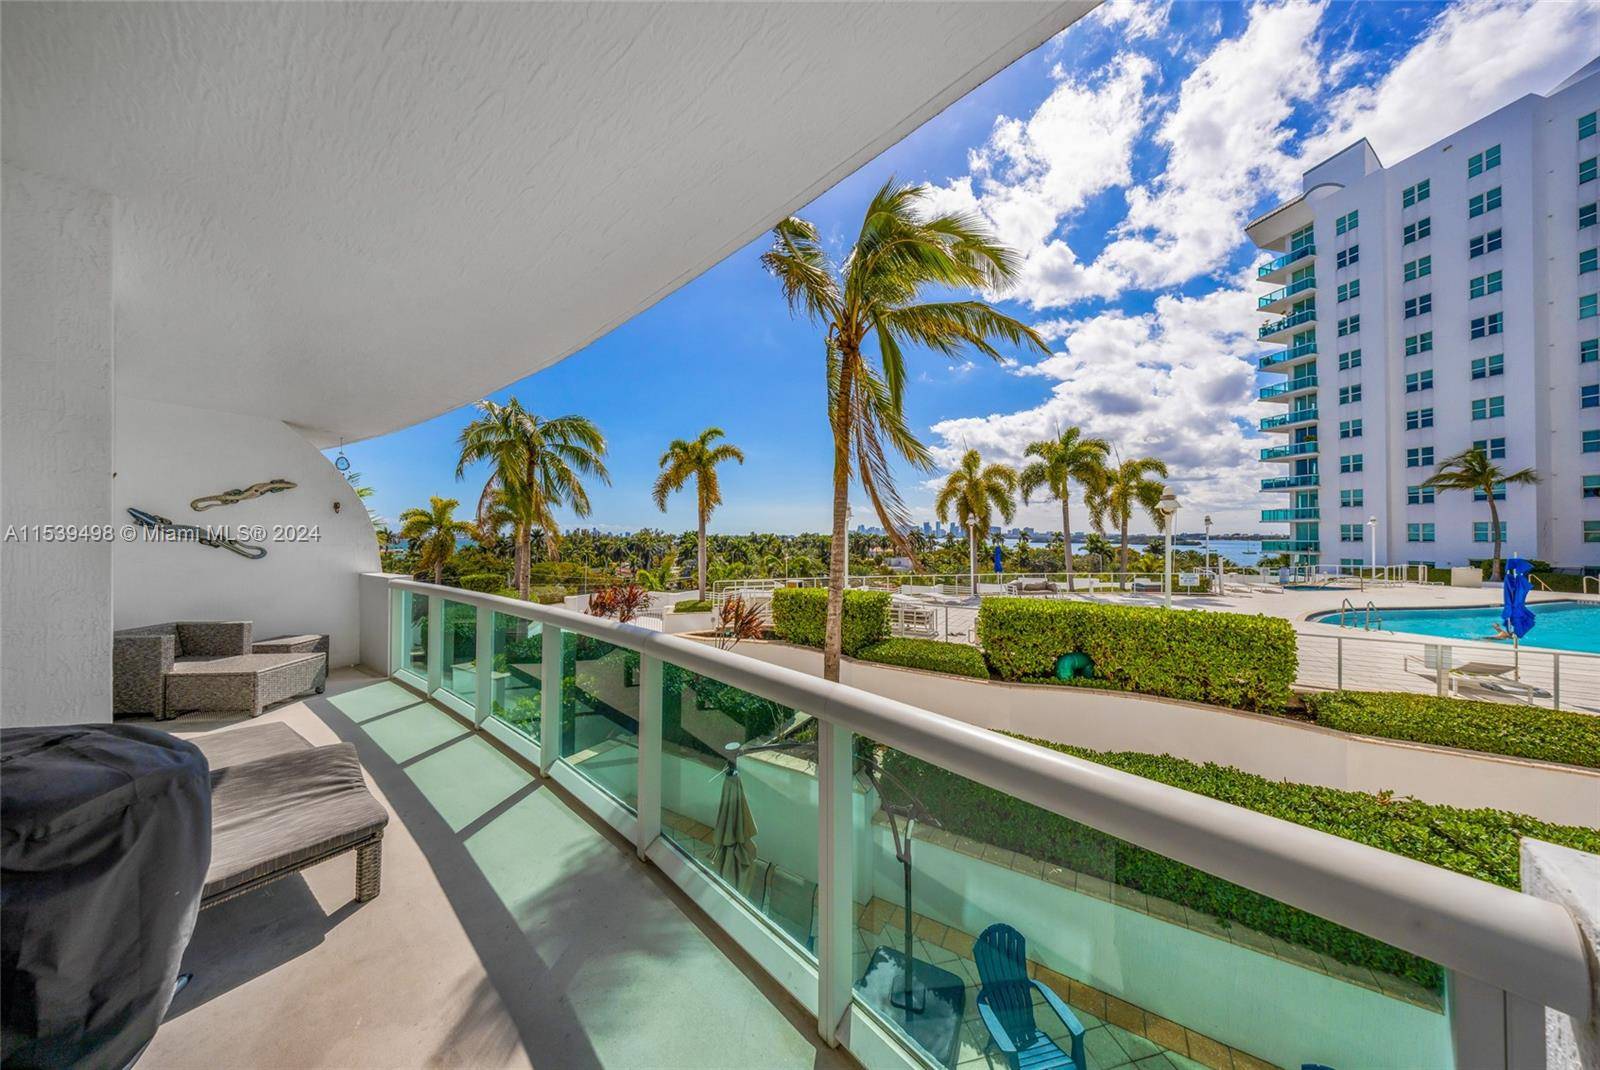 Stunning views from this modern and beautiful 2 bedrooms 2 bathrooms in high demand building in North Bay Village.